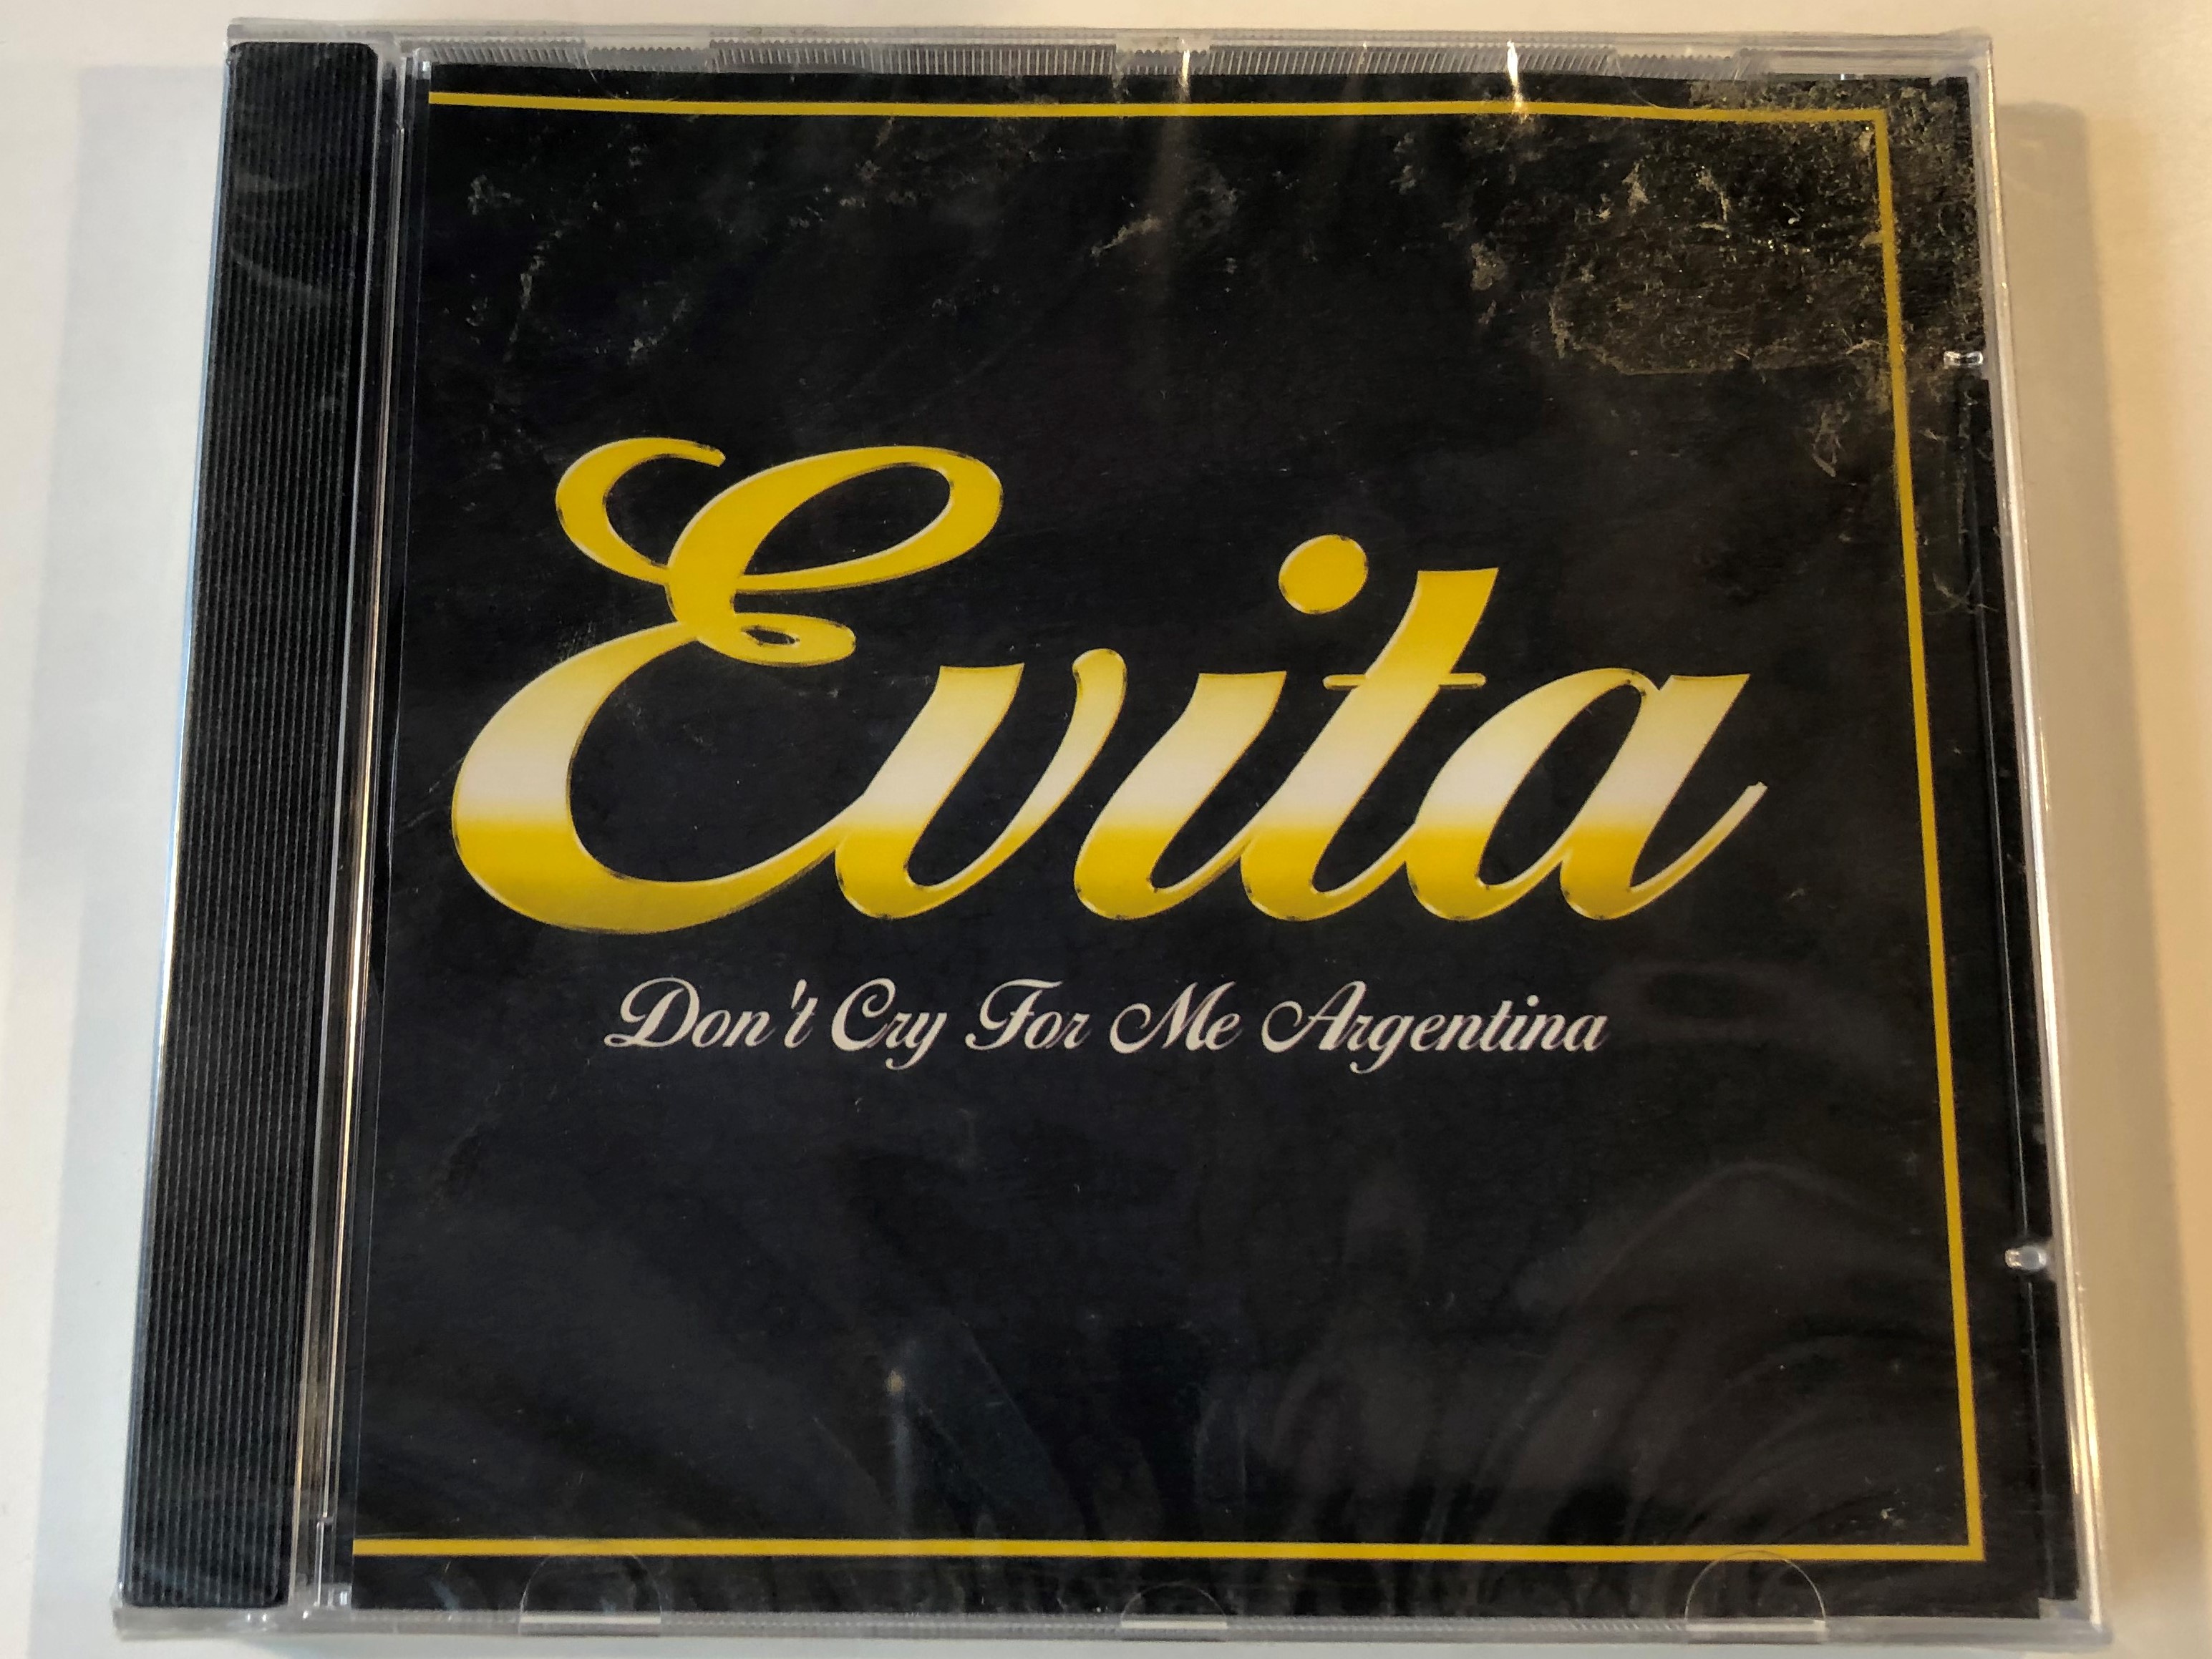 evita-don-t-cry-for-me-argentina-eurotrend-audio-cd-cd-157-1-.jpg